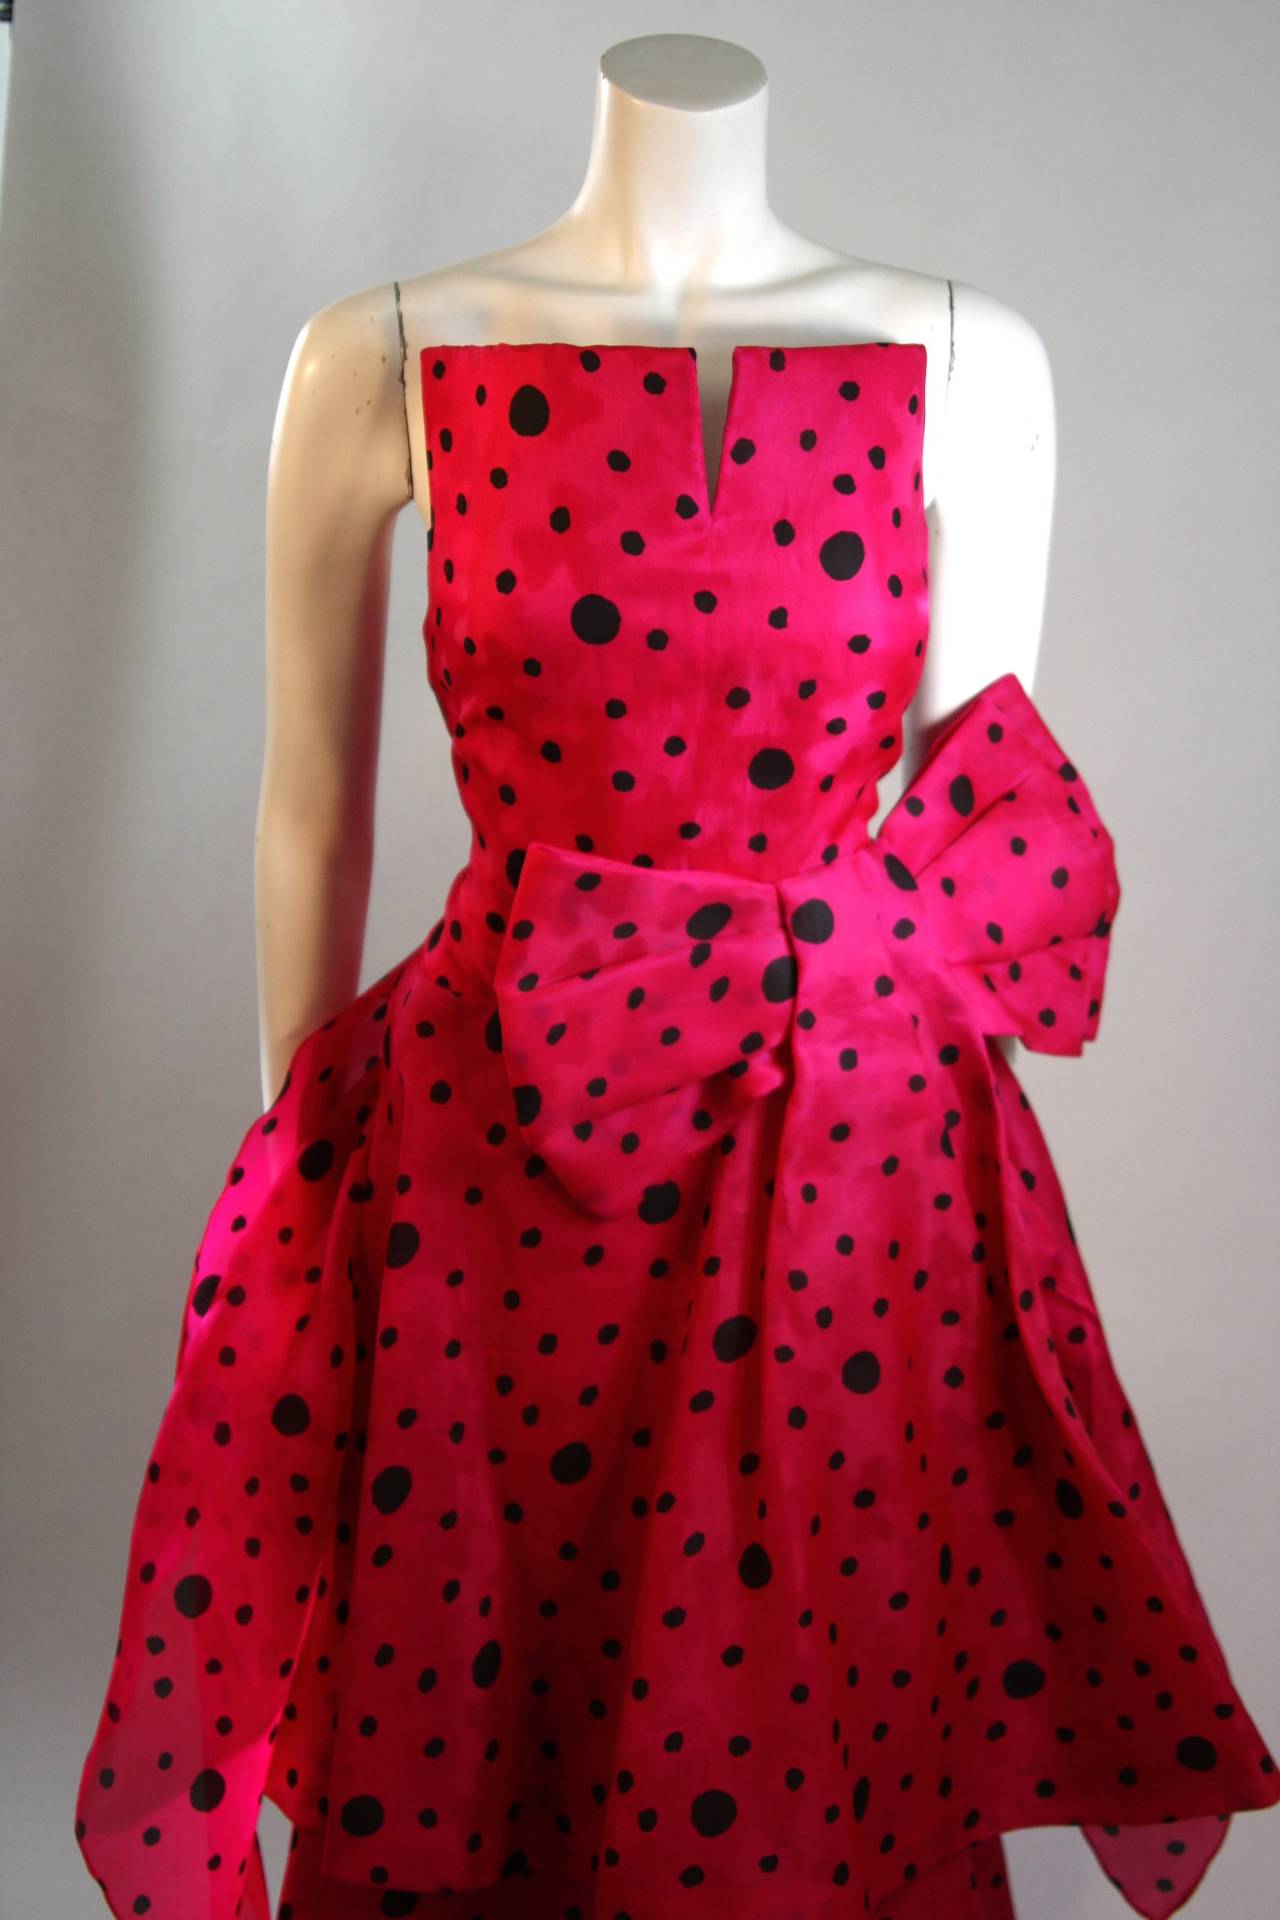 Women's Arnold Scaasi Pink and Black Polka Dot Gown with Shawl